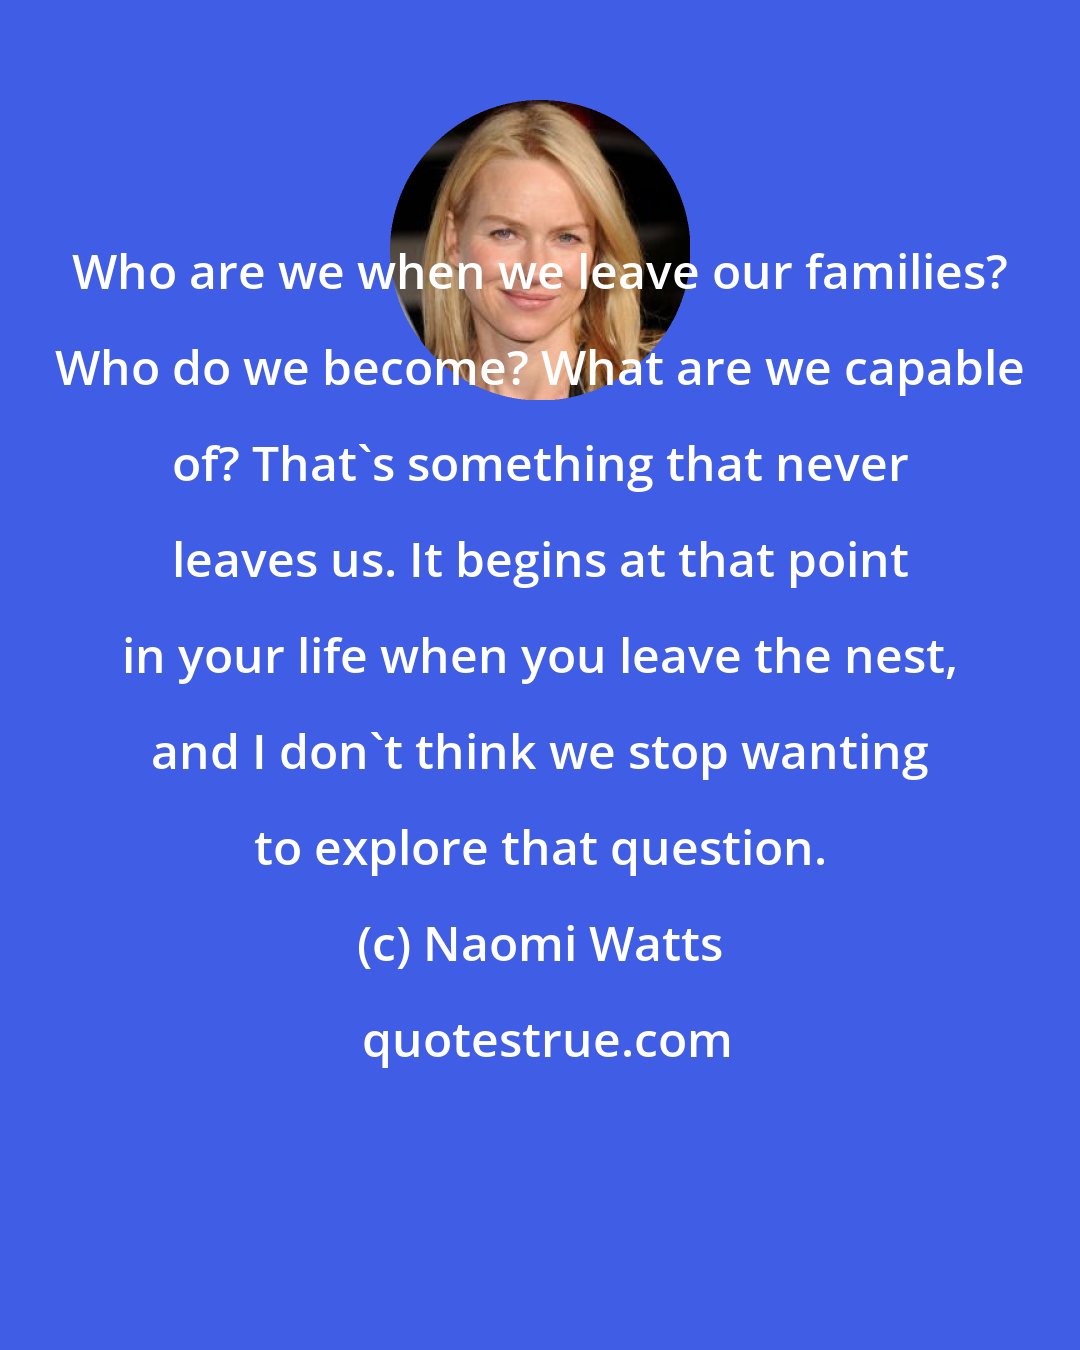 Naomi Watts: Who are we when we leave our families? Who do we become? What are we capable of? That's something that never leaves us. It begins at that point in your life when you leave the nest, and I don't think we stop wanting to explore that question.